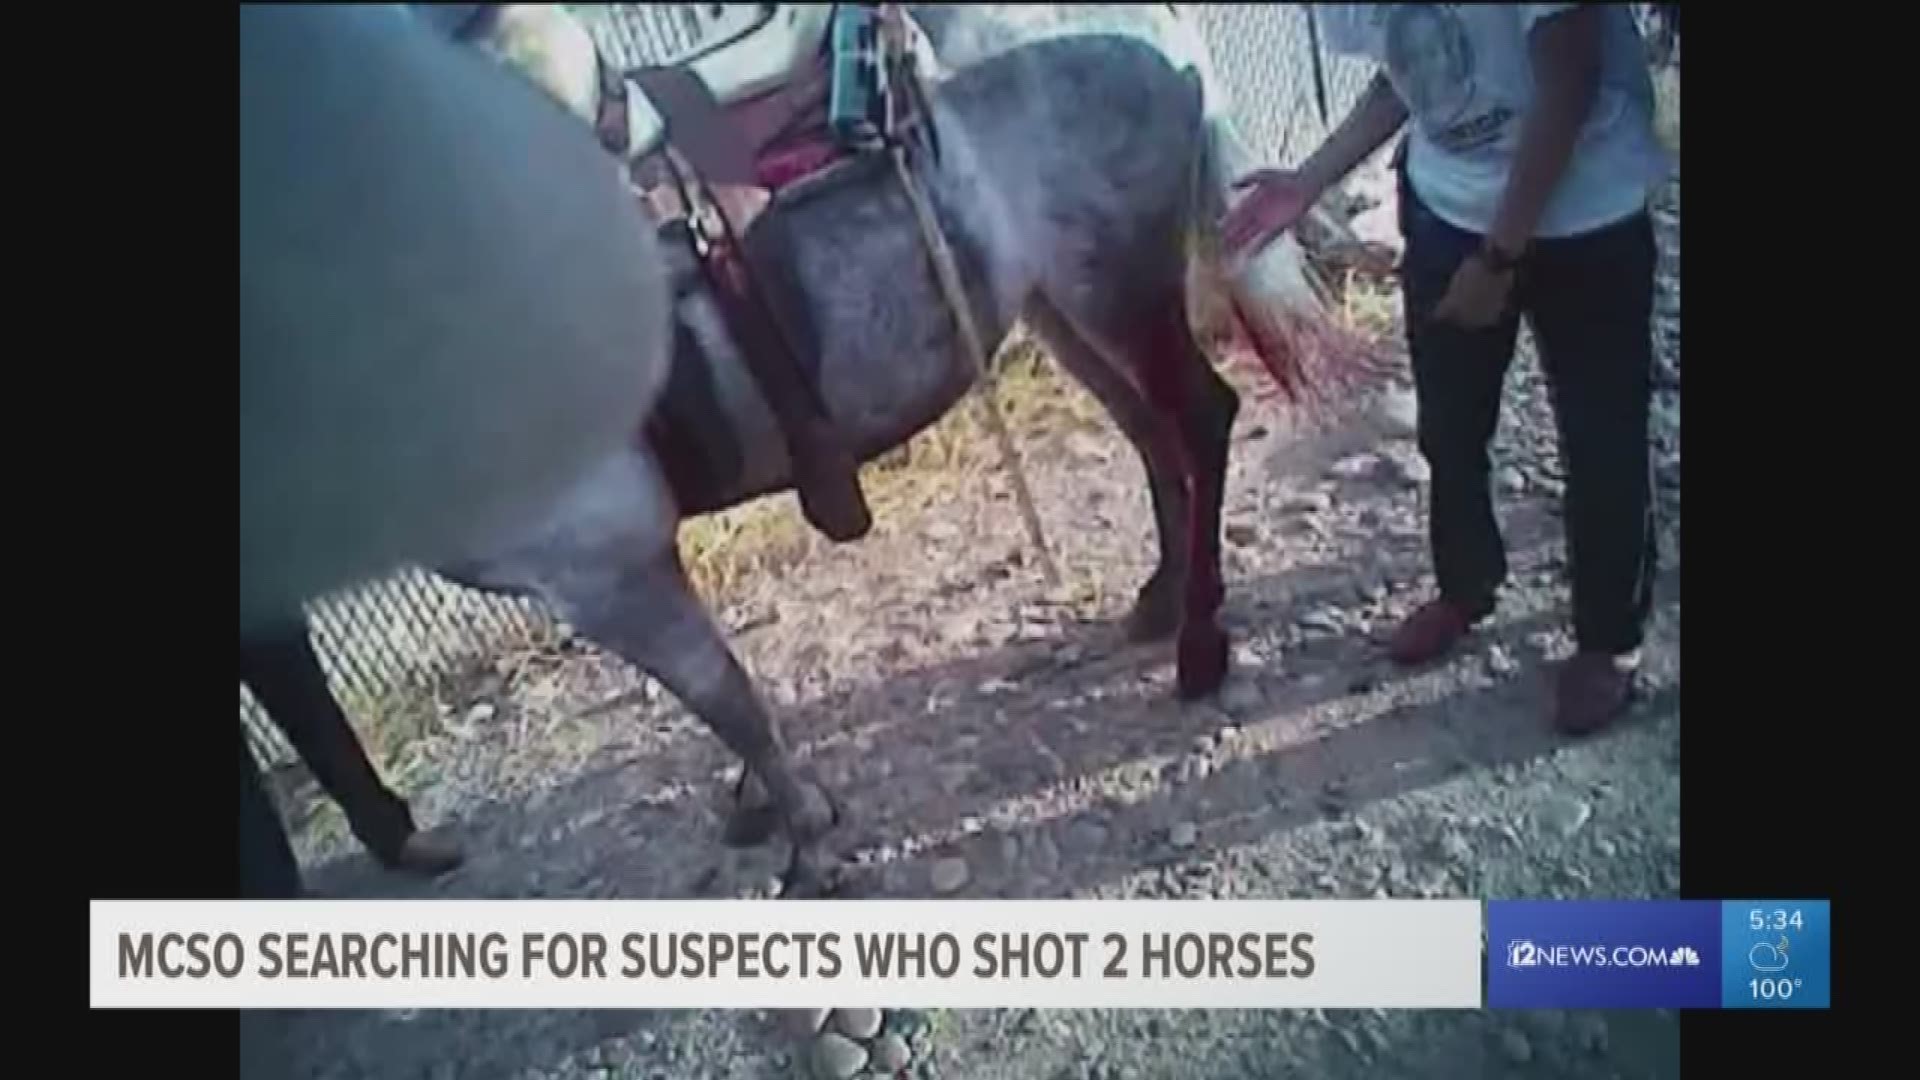 Police are still looking for answers after two horses were shot in a river bed in Laveen in 2017.